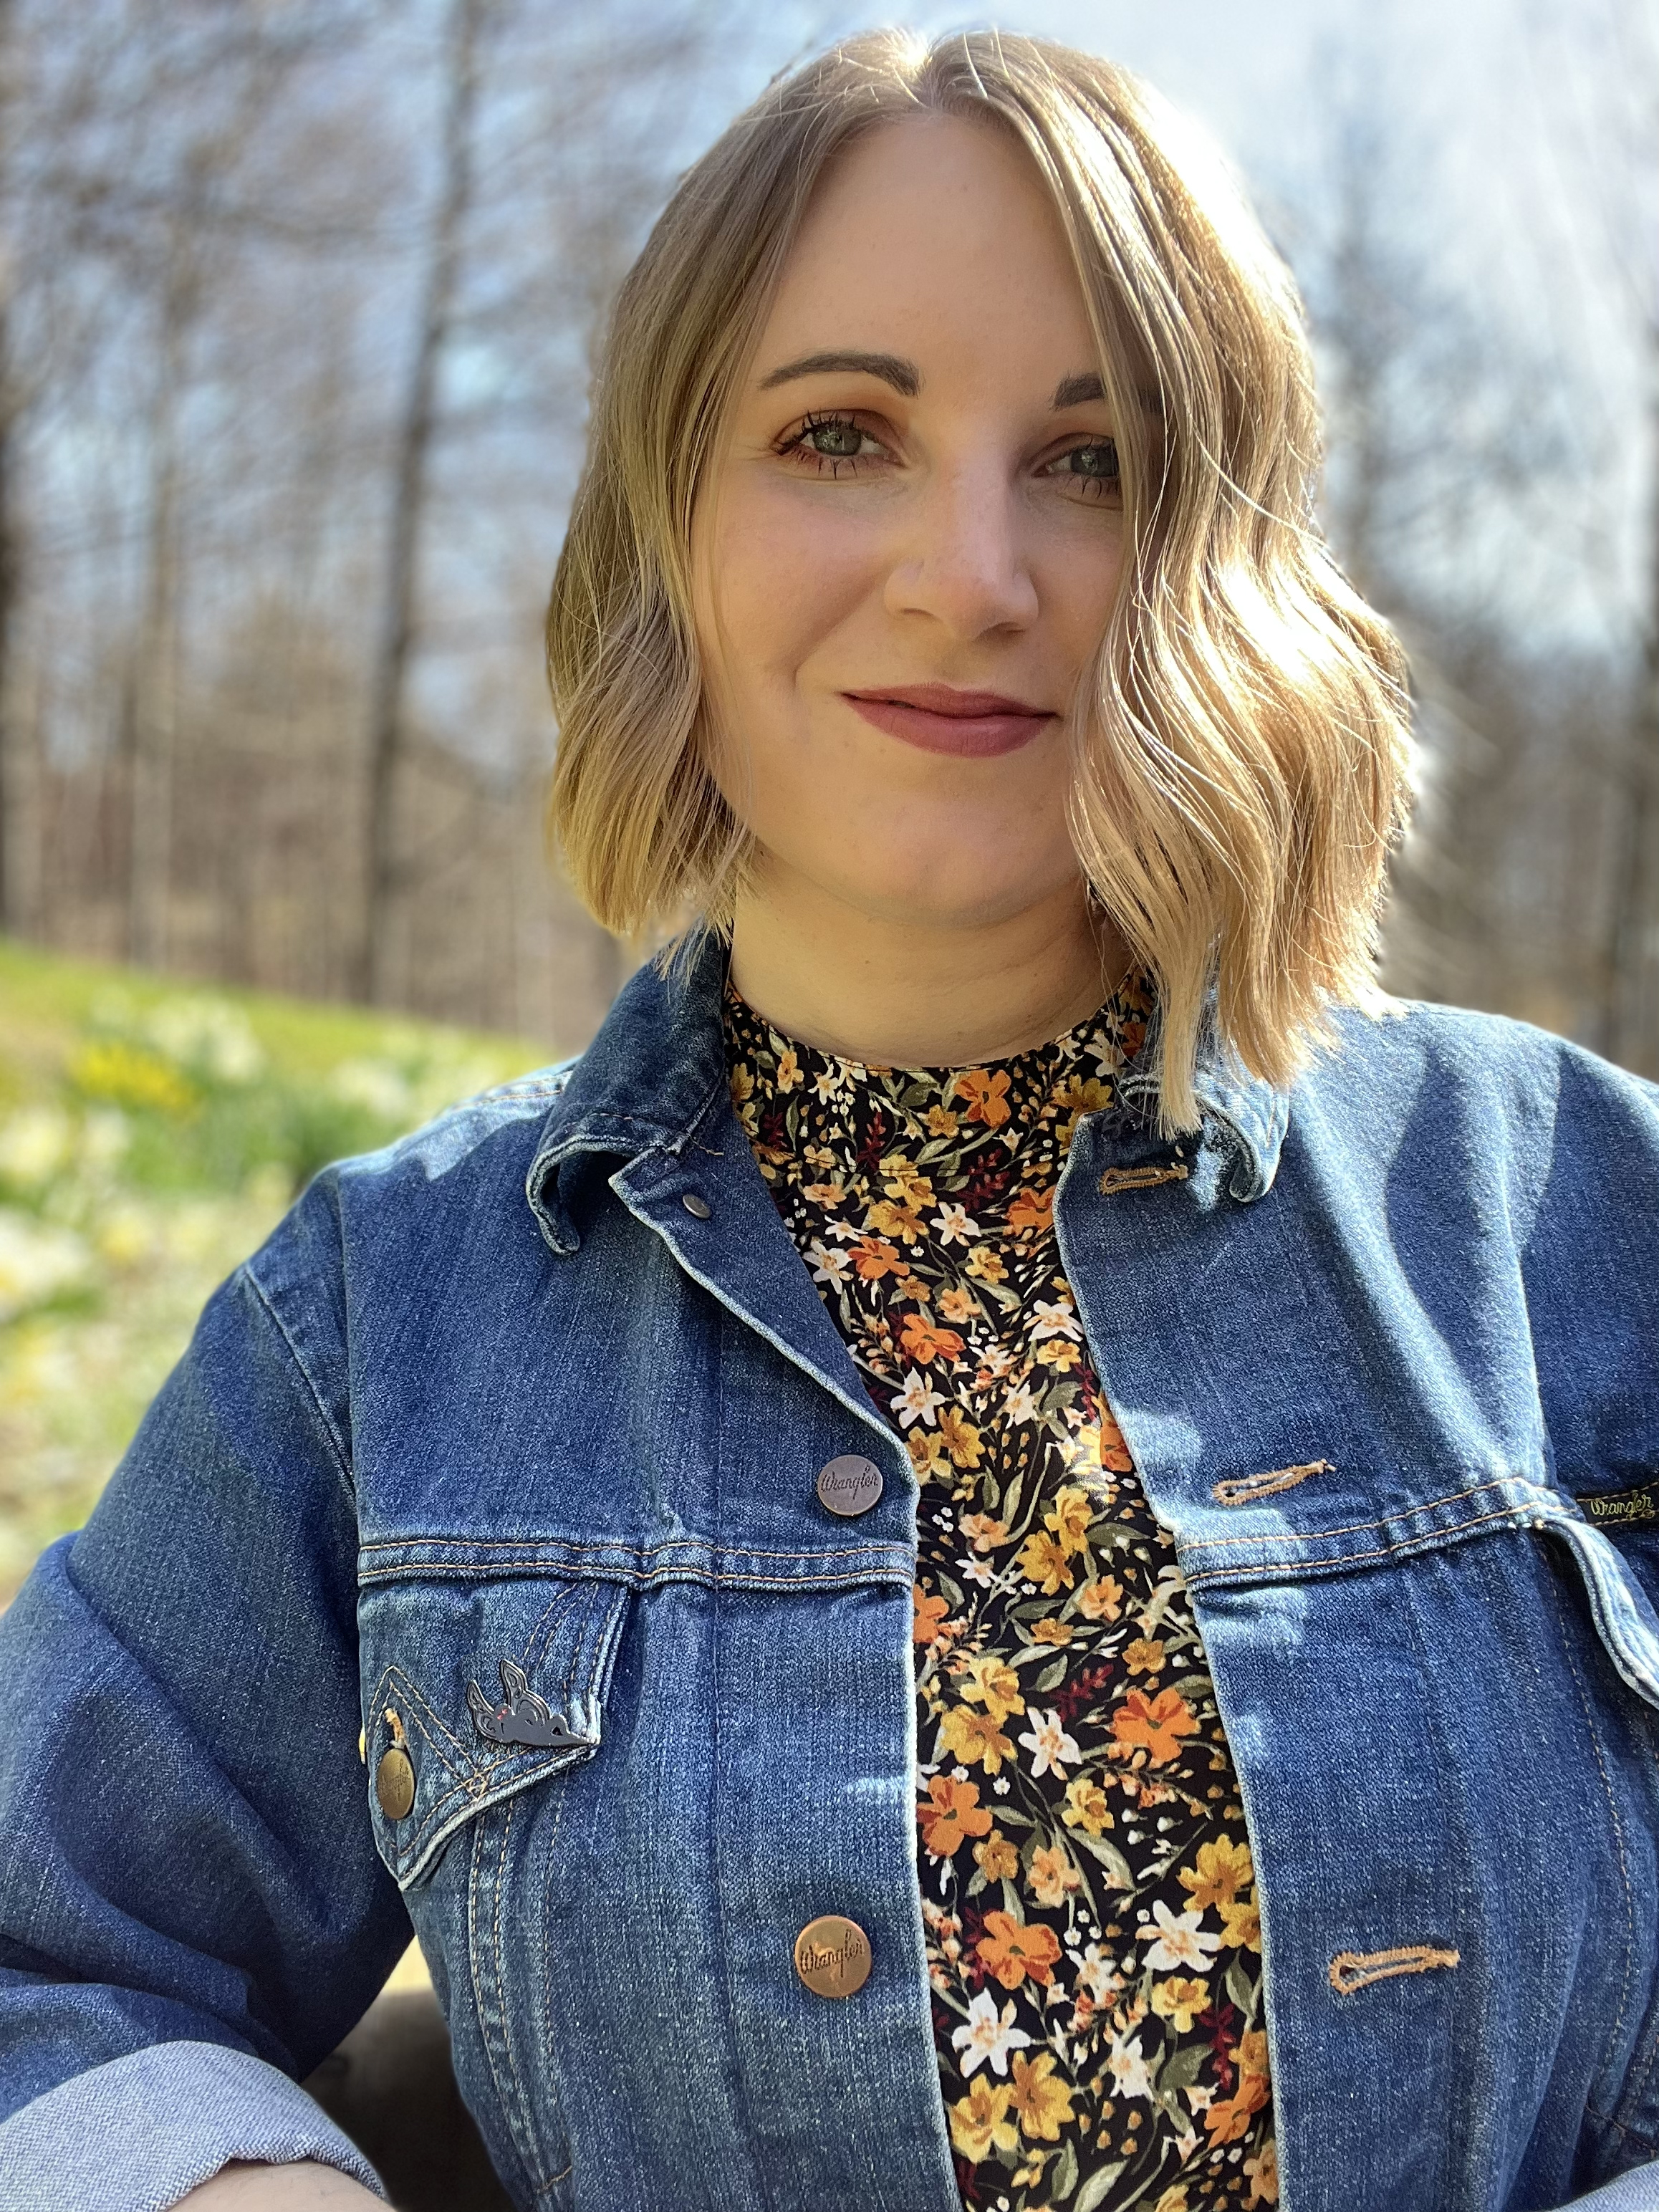 Picture of blonde woman in jean jacket and floral dress smiles with mouth closed at the camera.